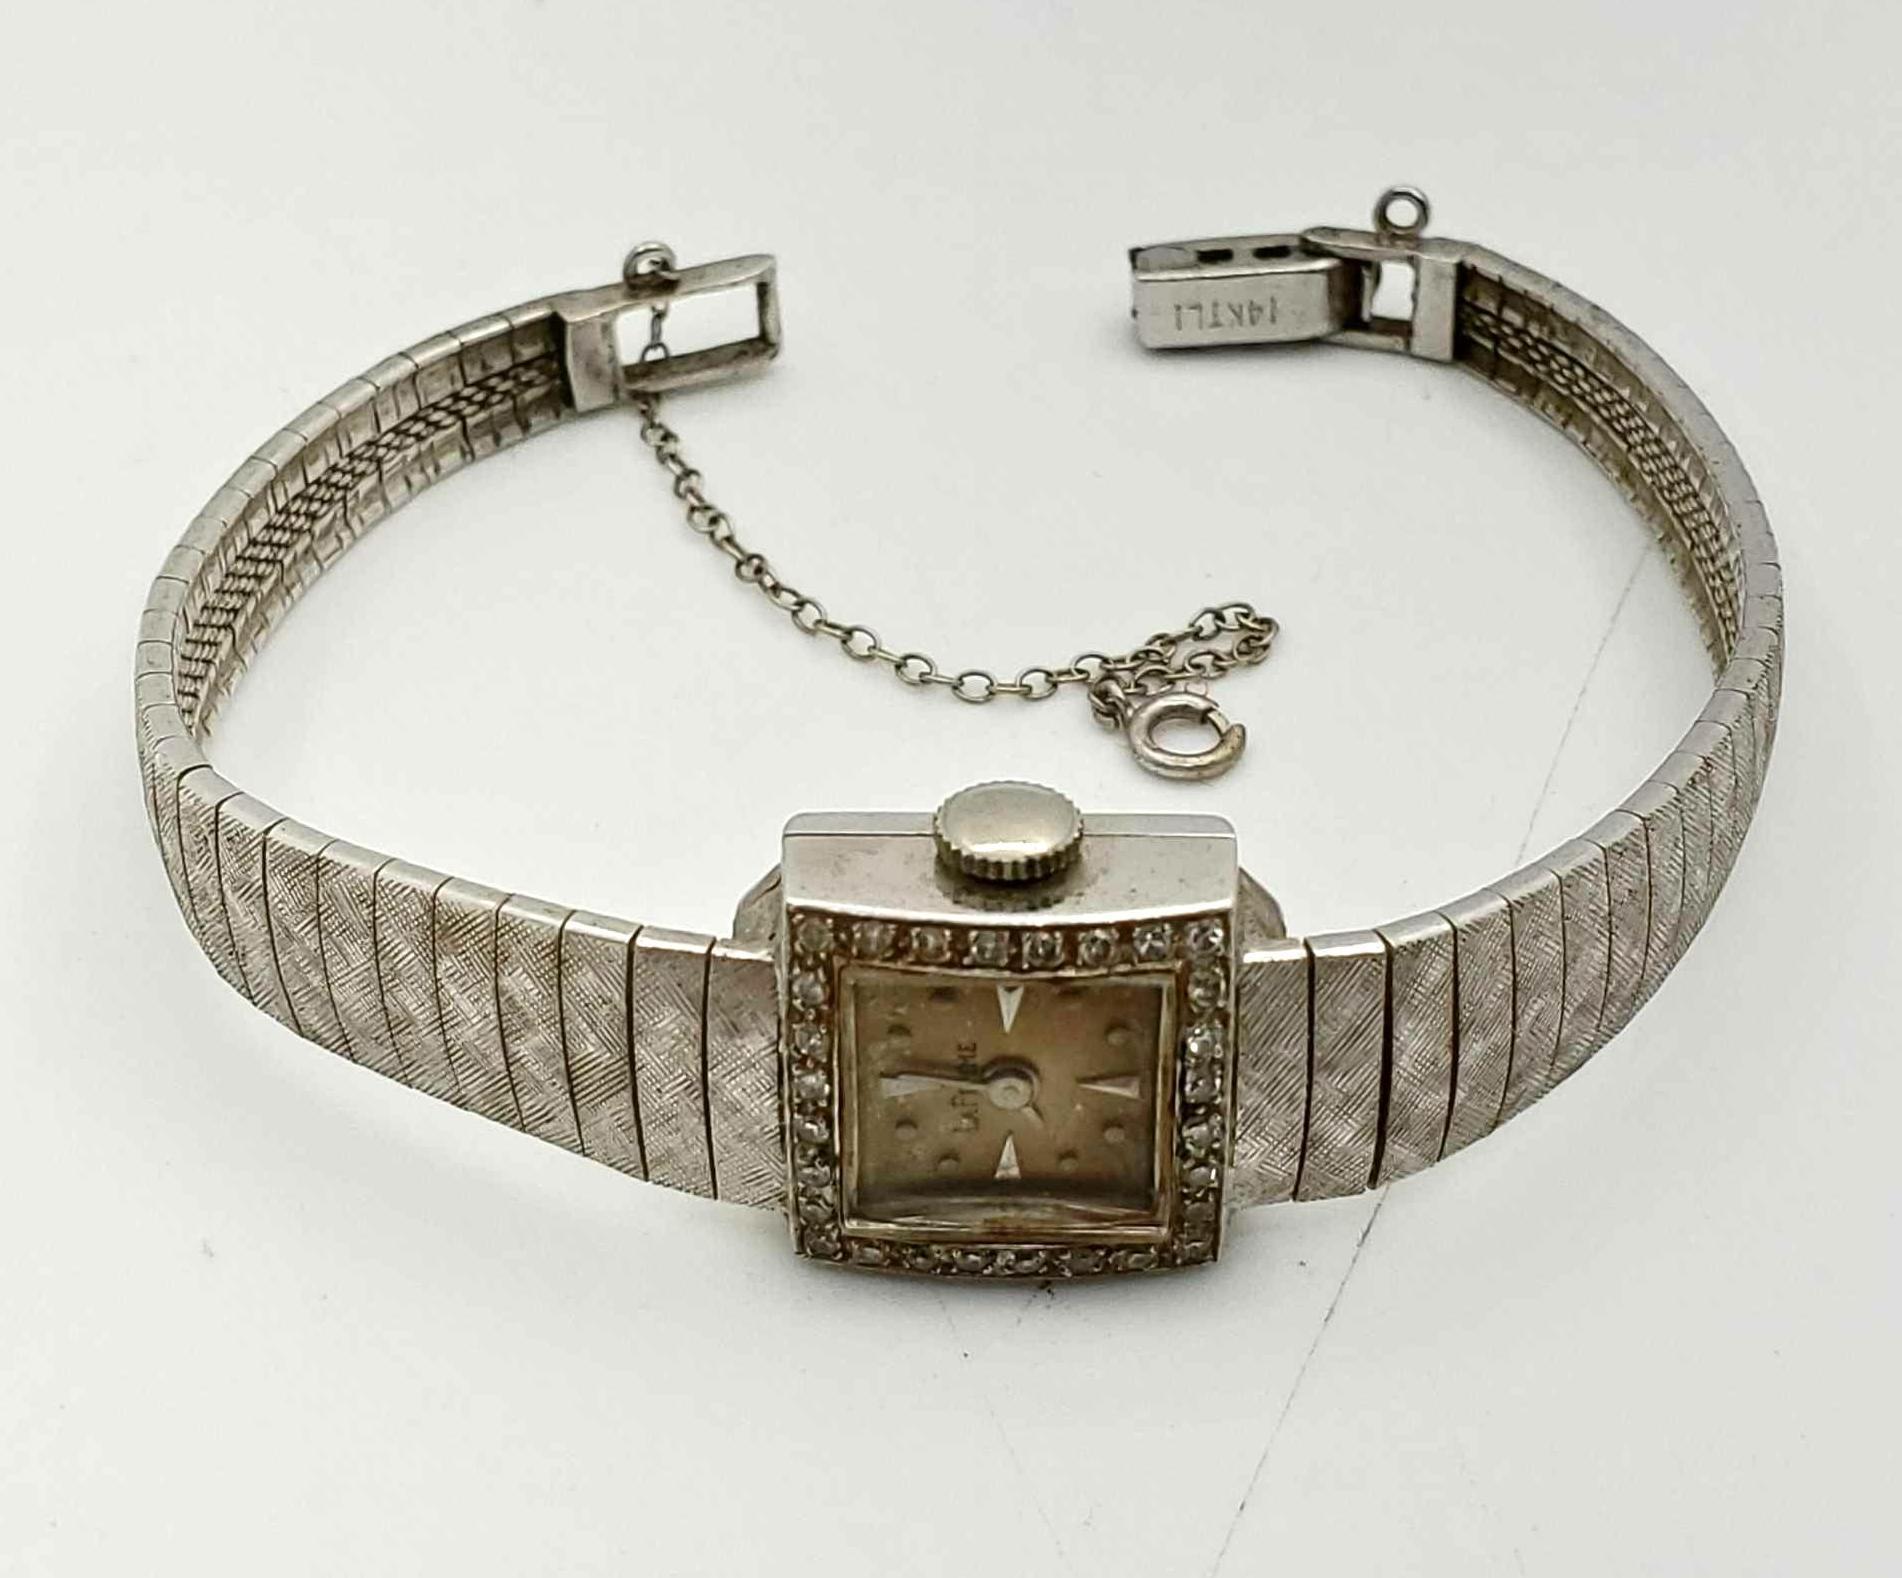 Ladies La Femme 14k White Gold Watch With Square Face Diamond Bezel And 14K covered Mesh Band